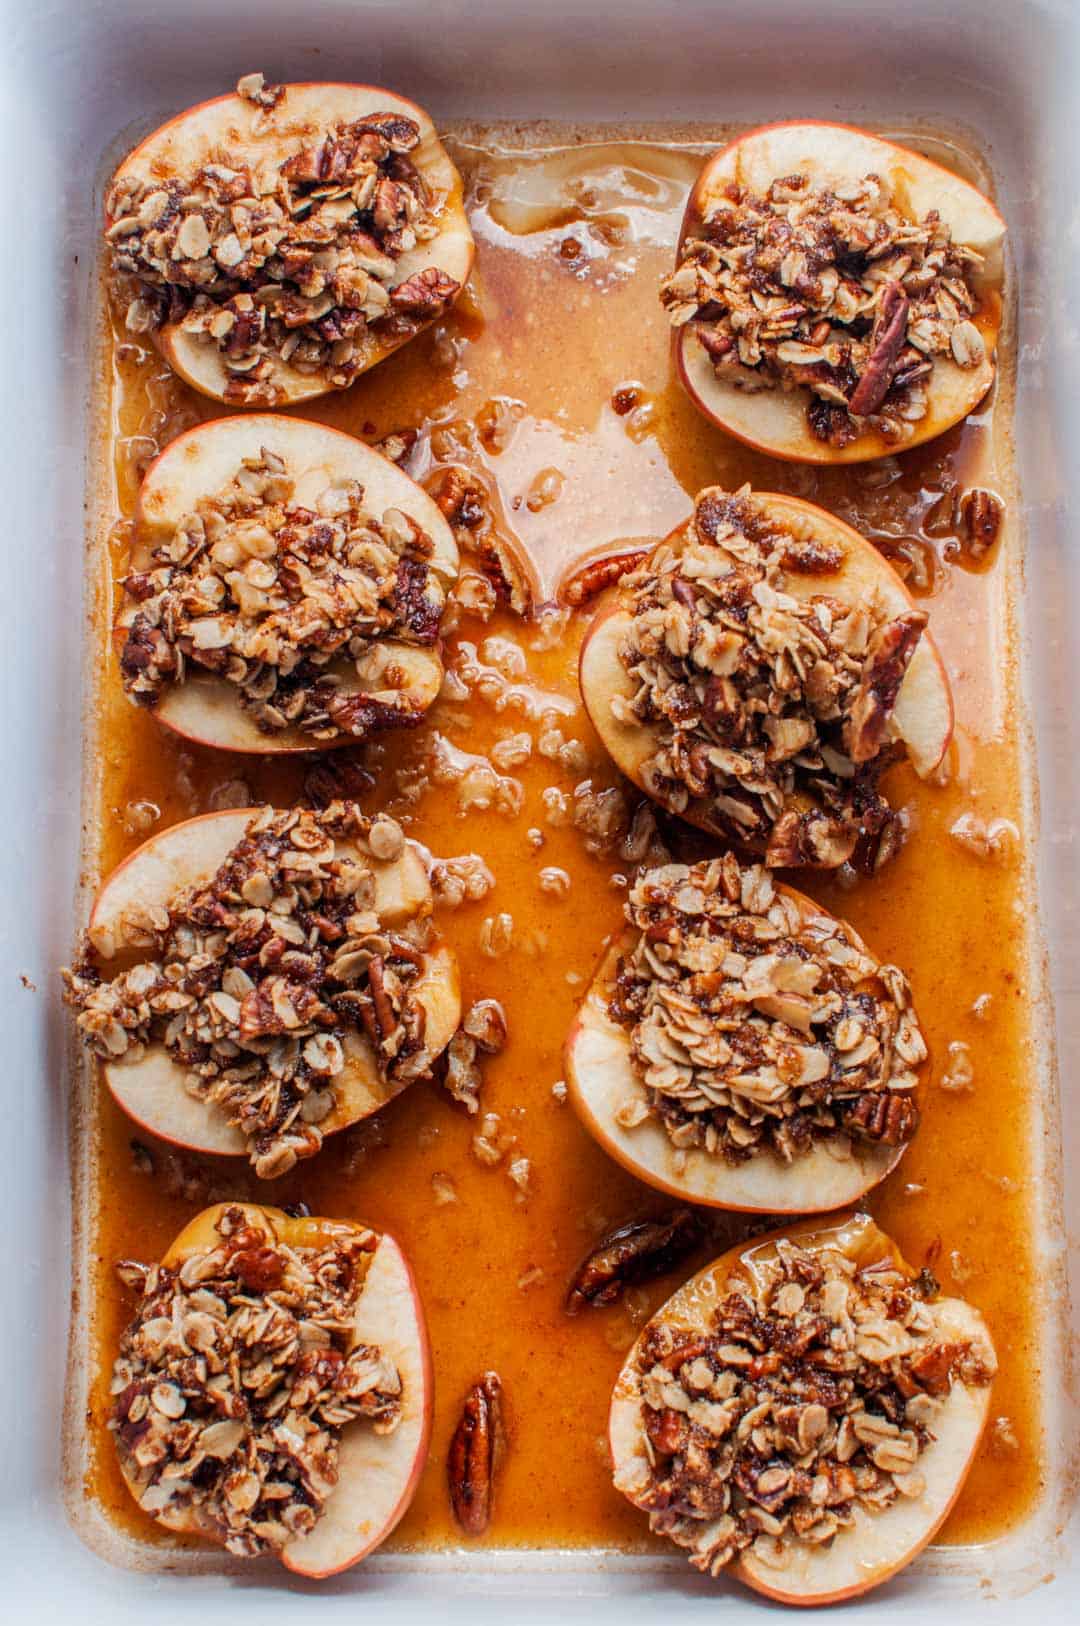 Baked apples with oatmeal in a casserole dish.